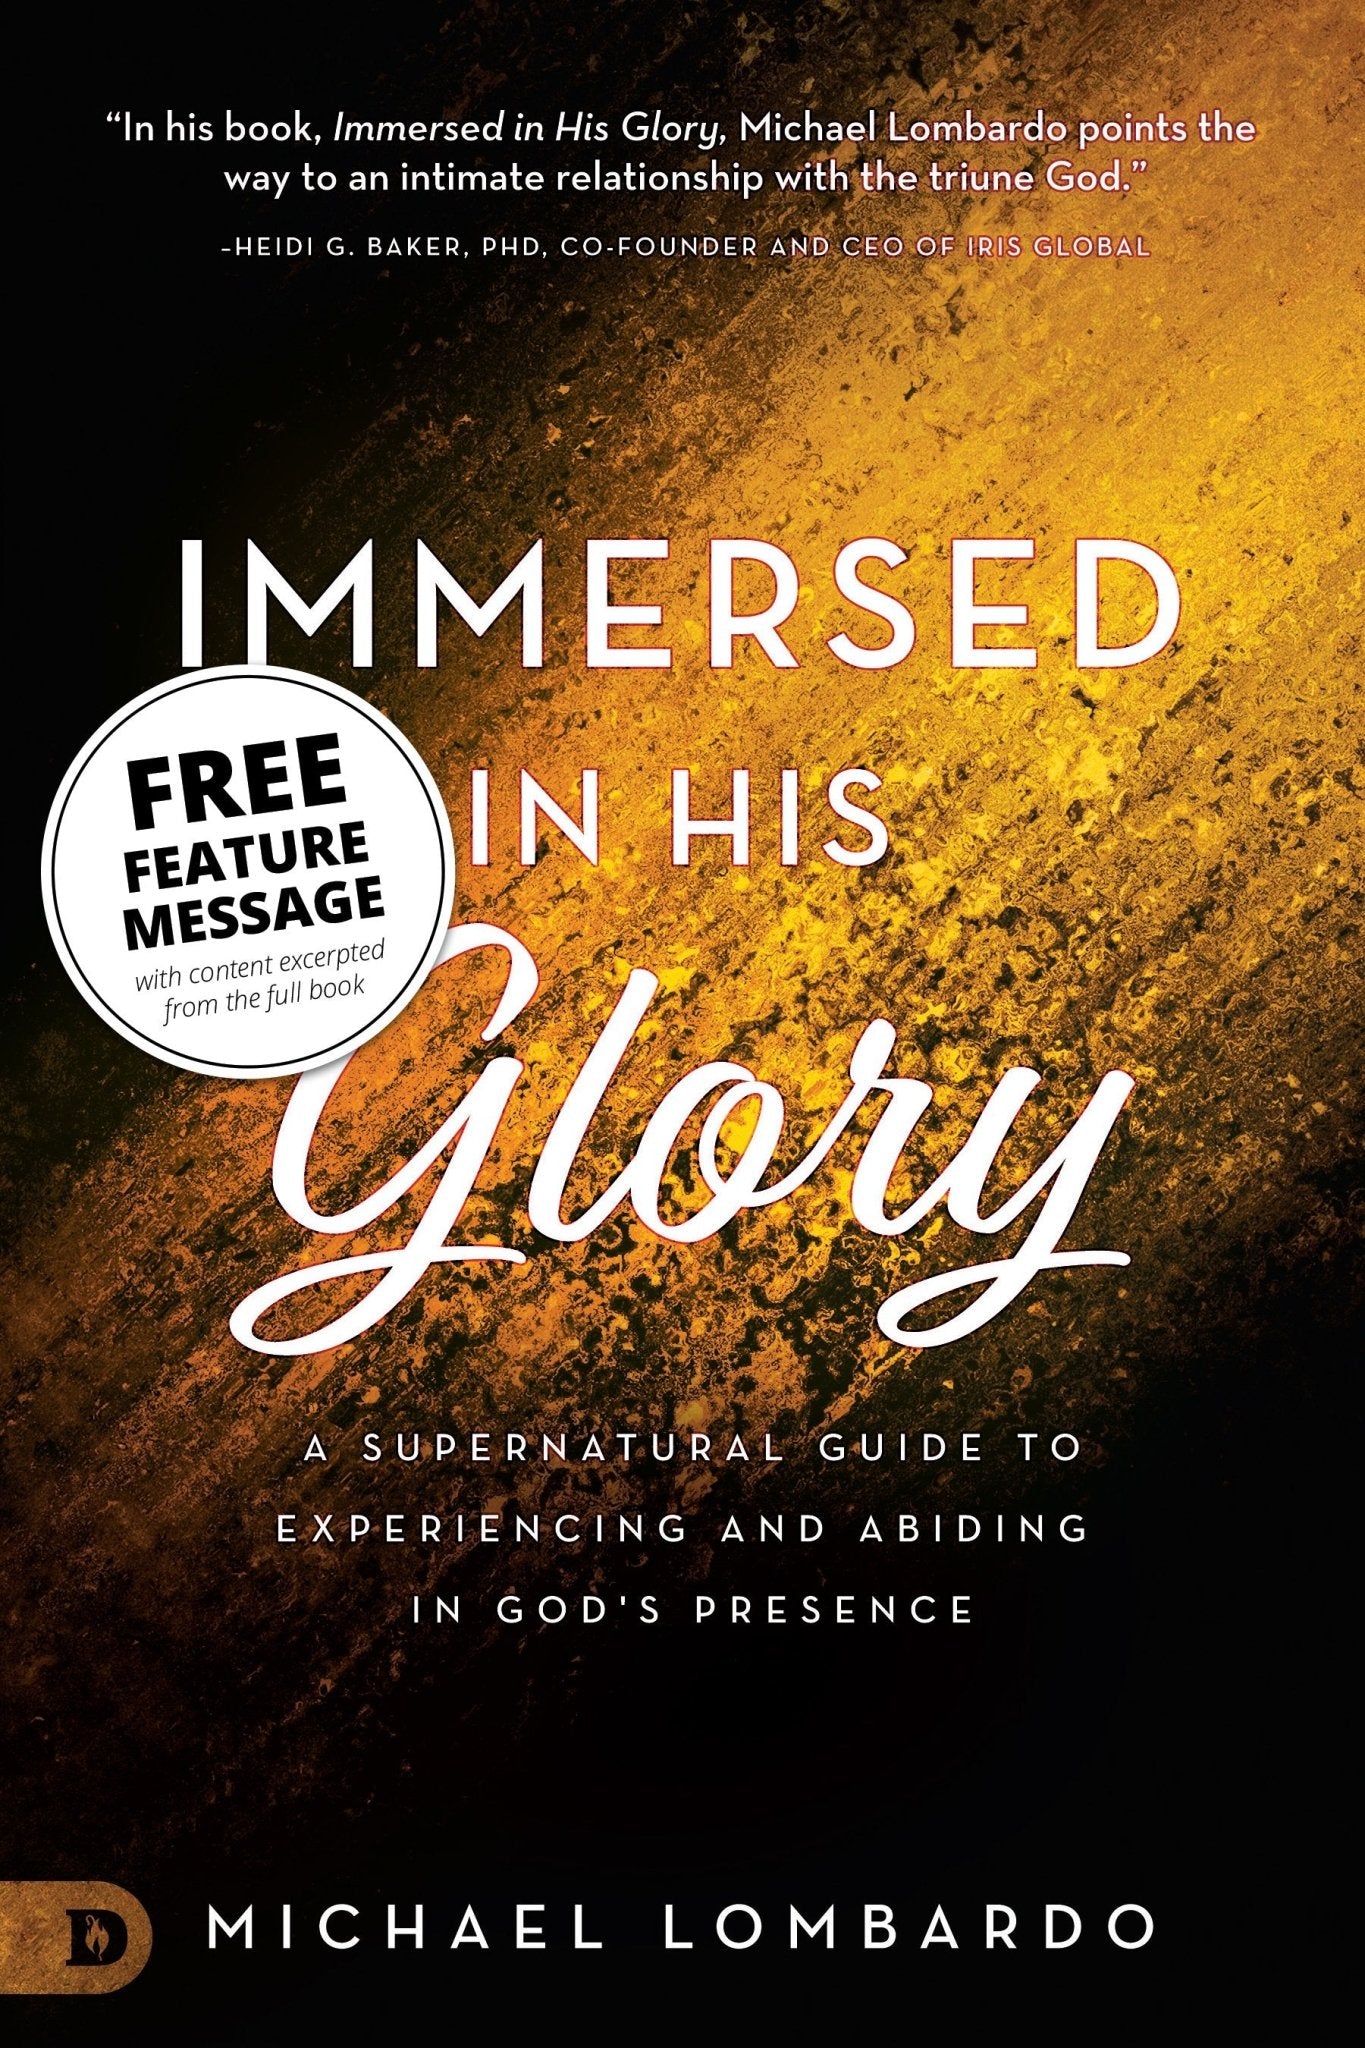 Immersed in His Glory Free Feature Message (Digital Download) - Faith & Flame - Books and Gifts - Destiny Image - DIFIDD